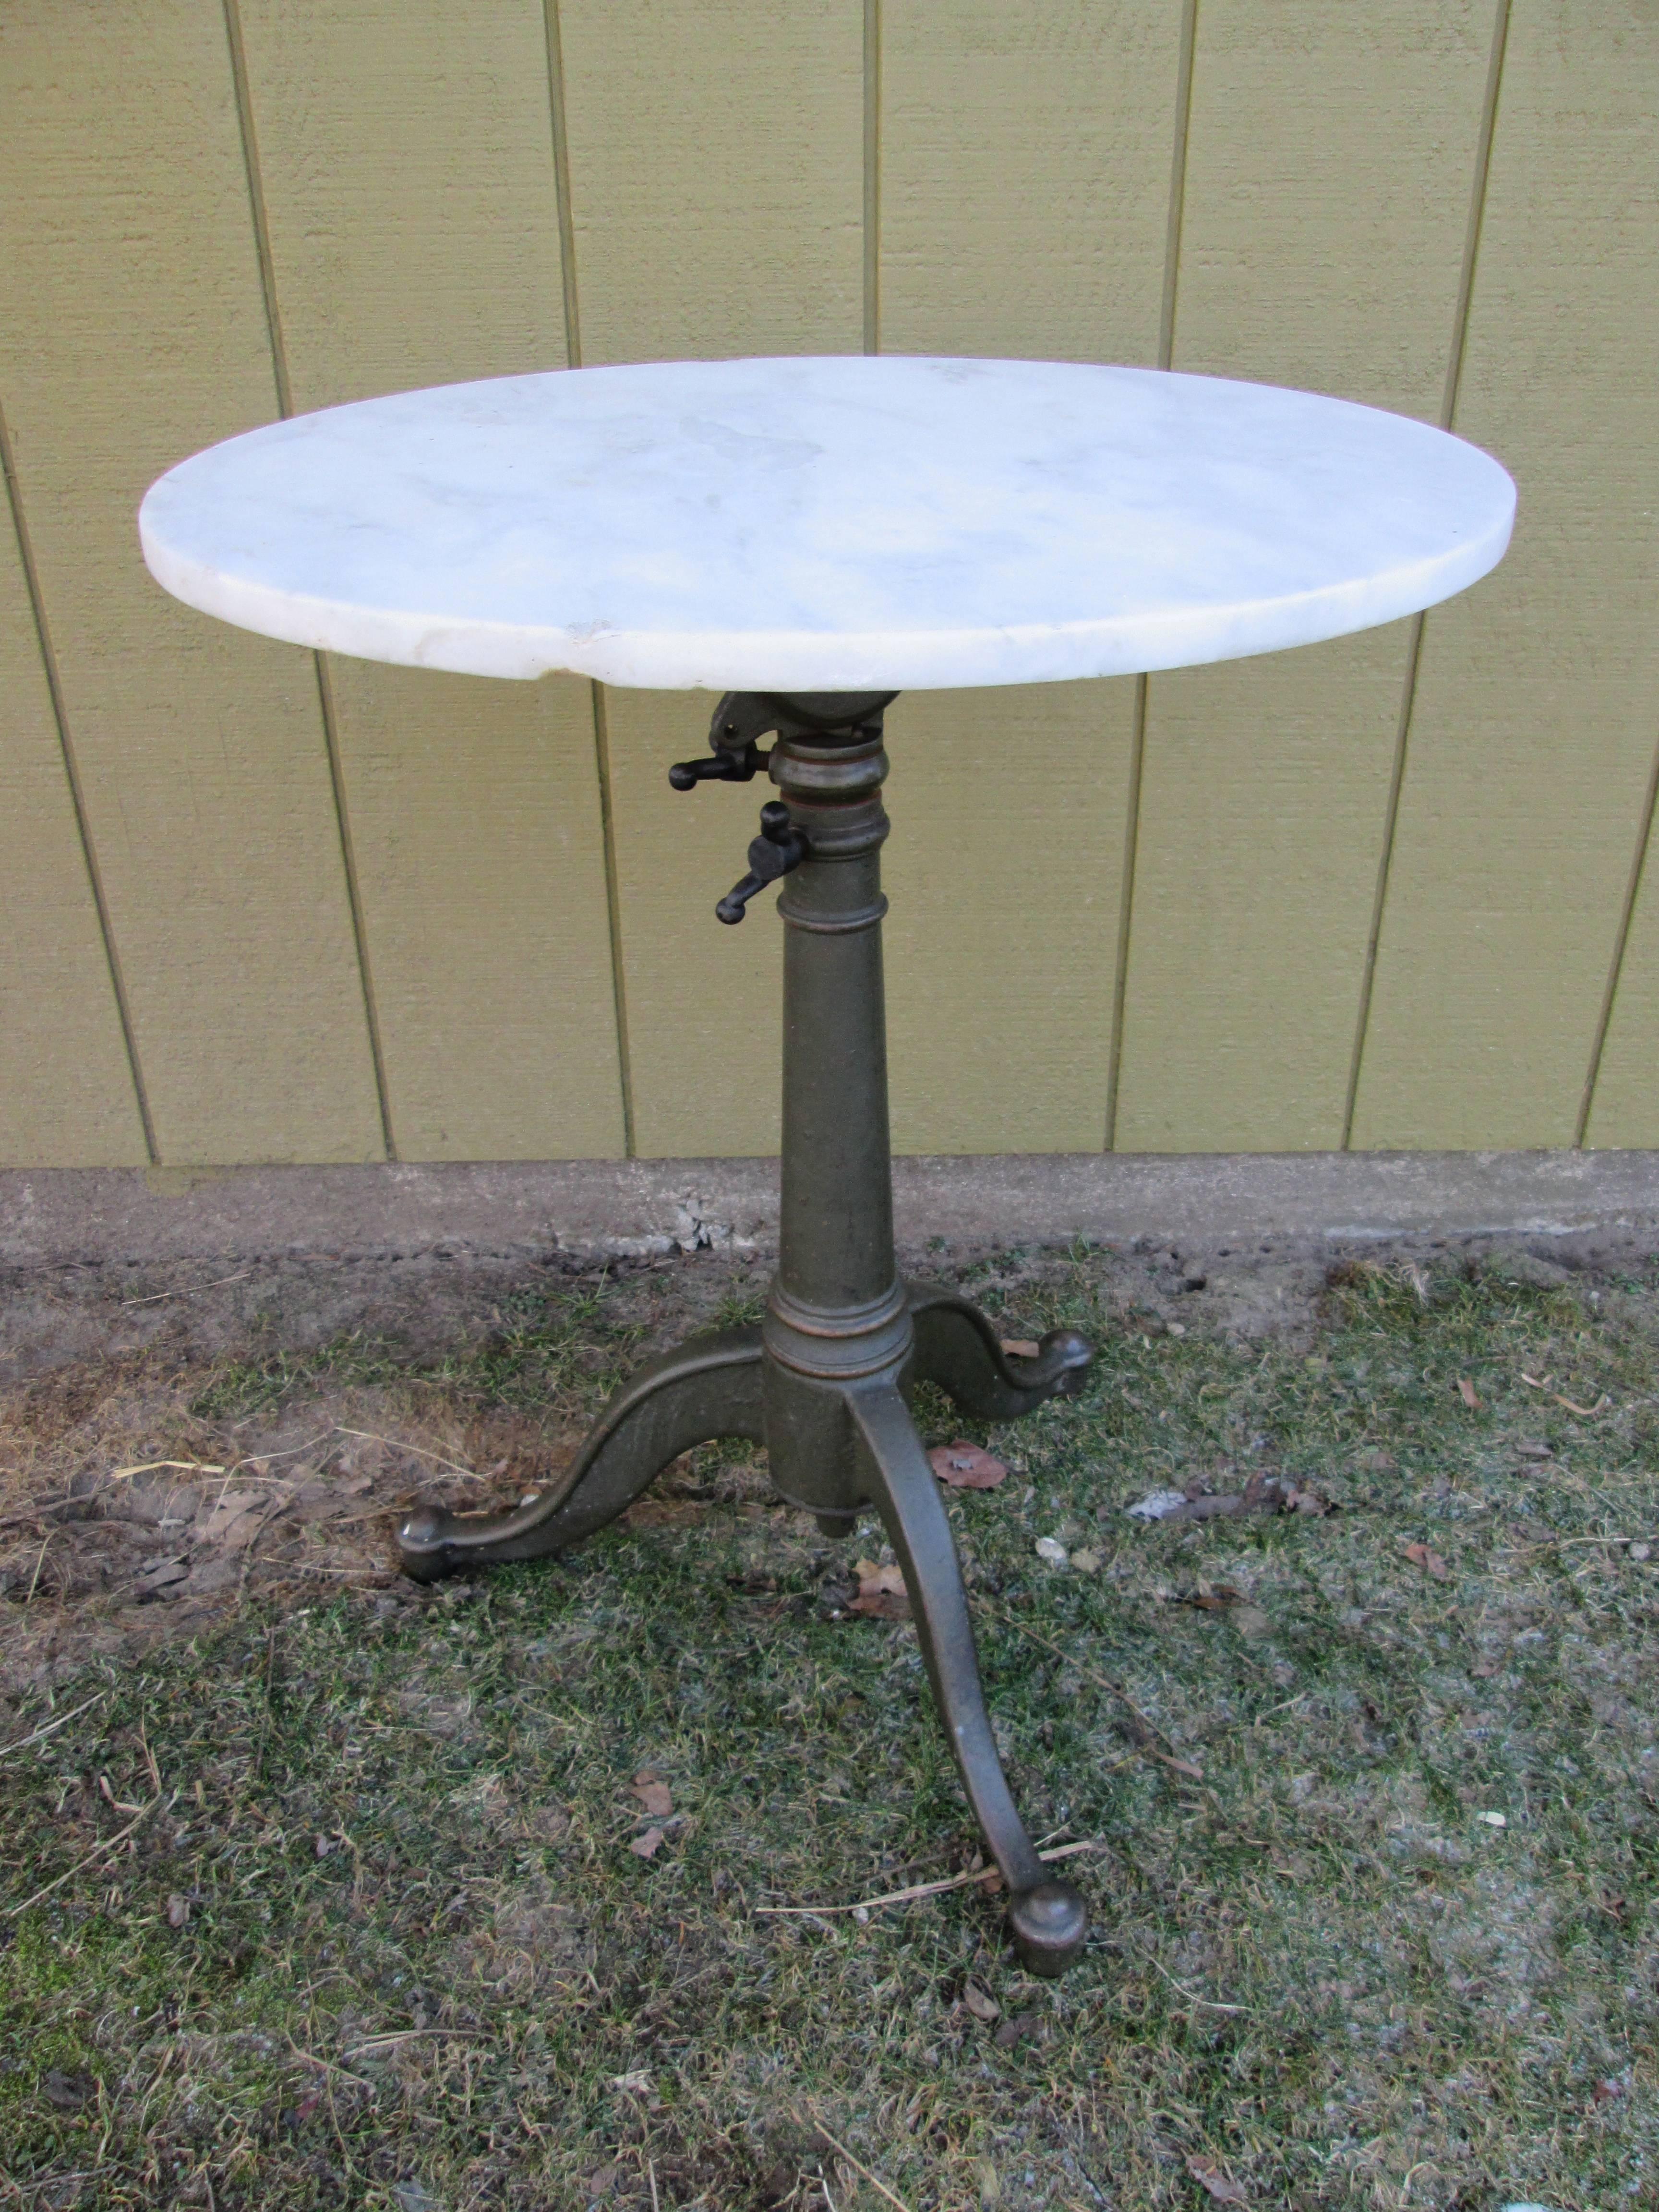 Honed round white marble top. Adjustable drafting table base in original dark paint. 